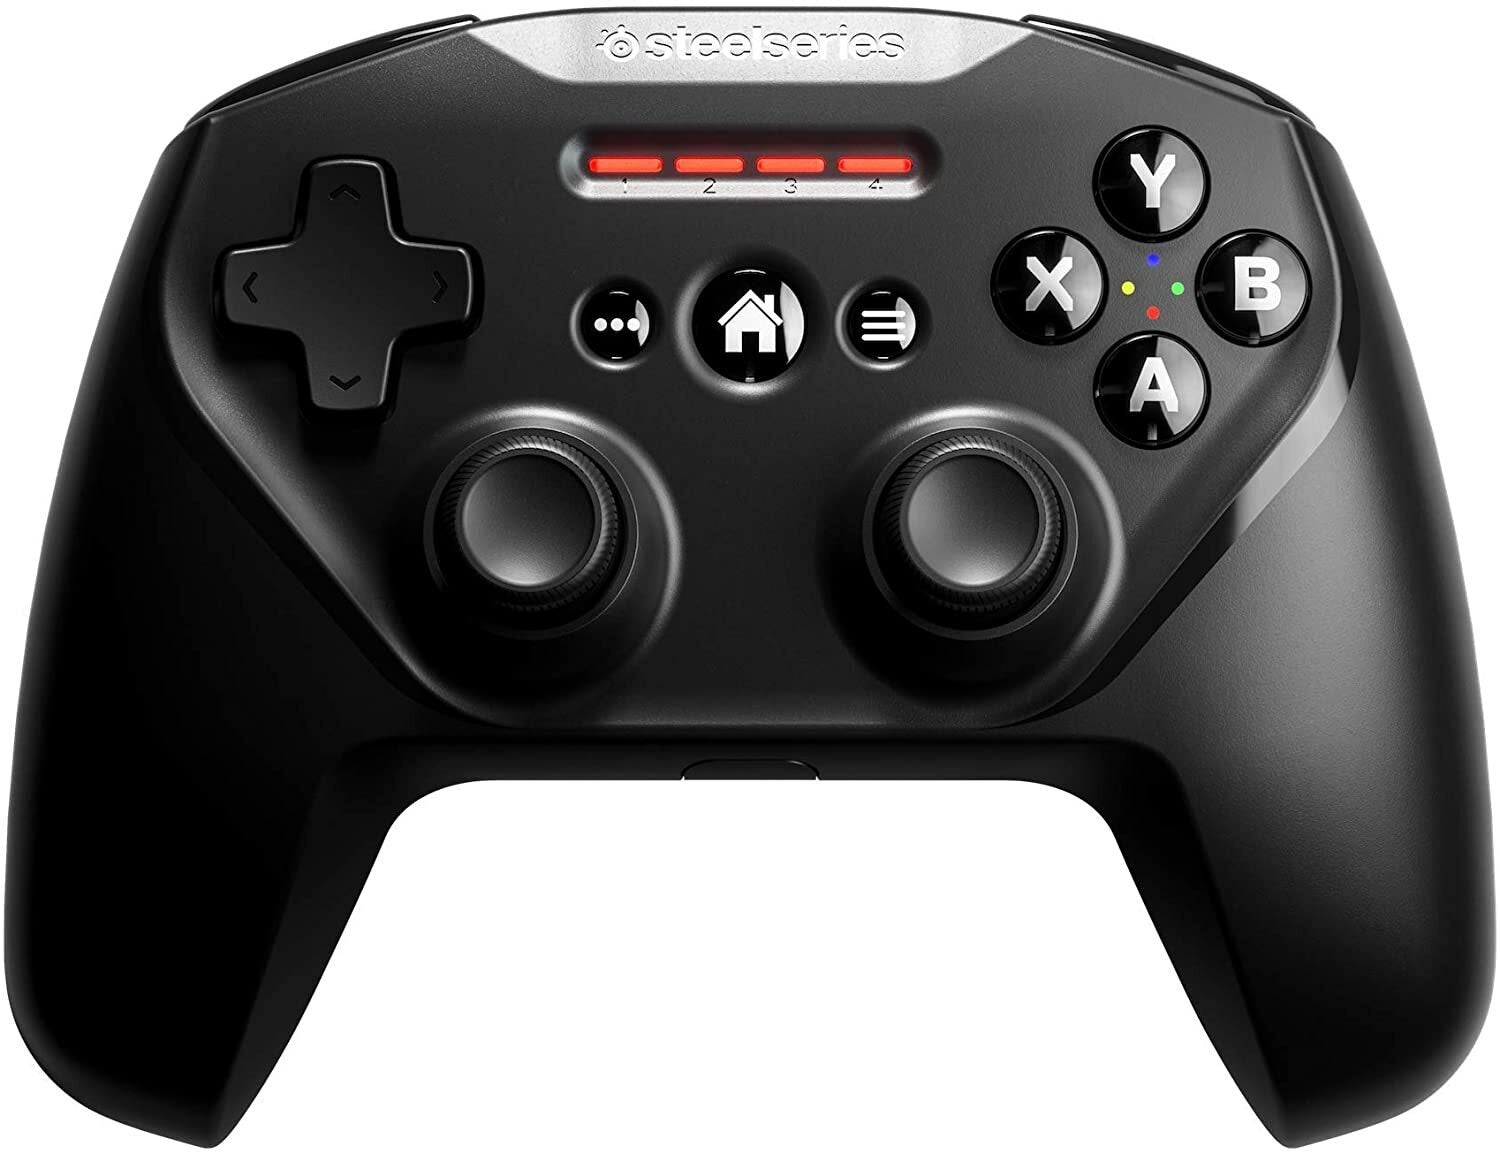 SteelSeries Nimbus+ controller. - Best game controllers for iPhone and Android